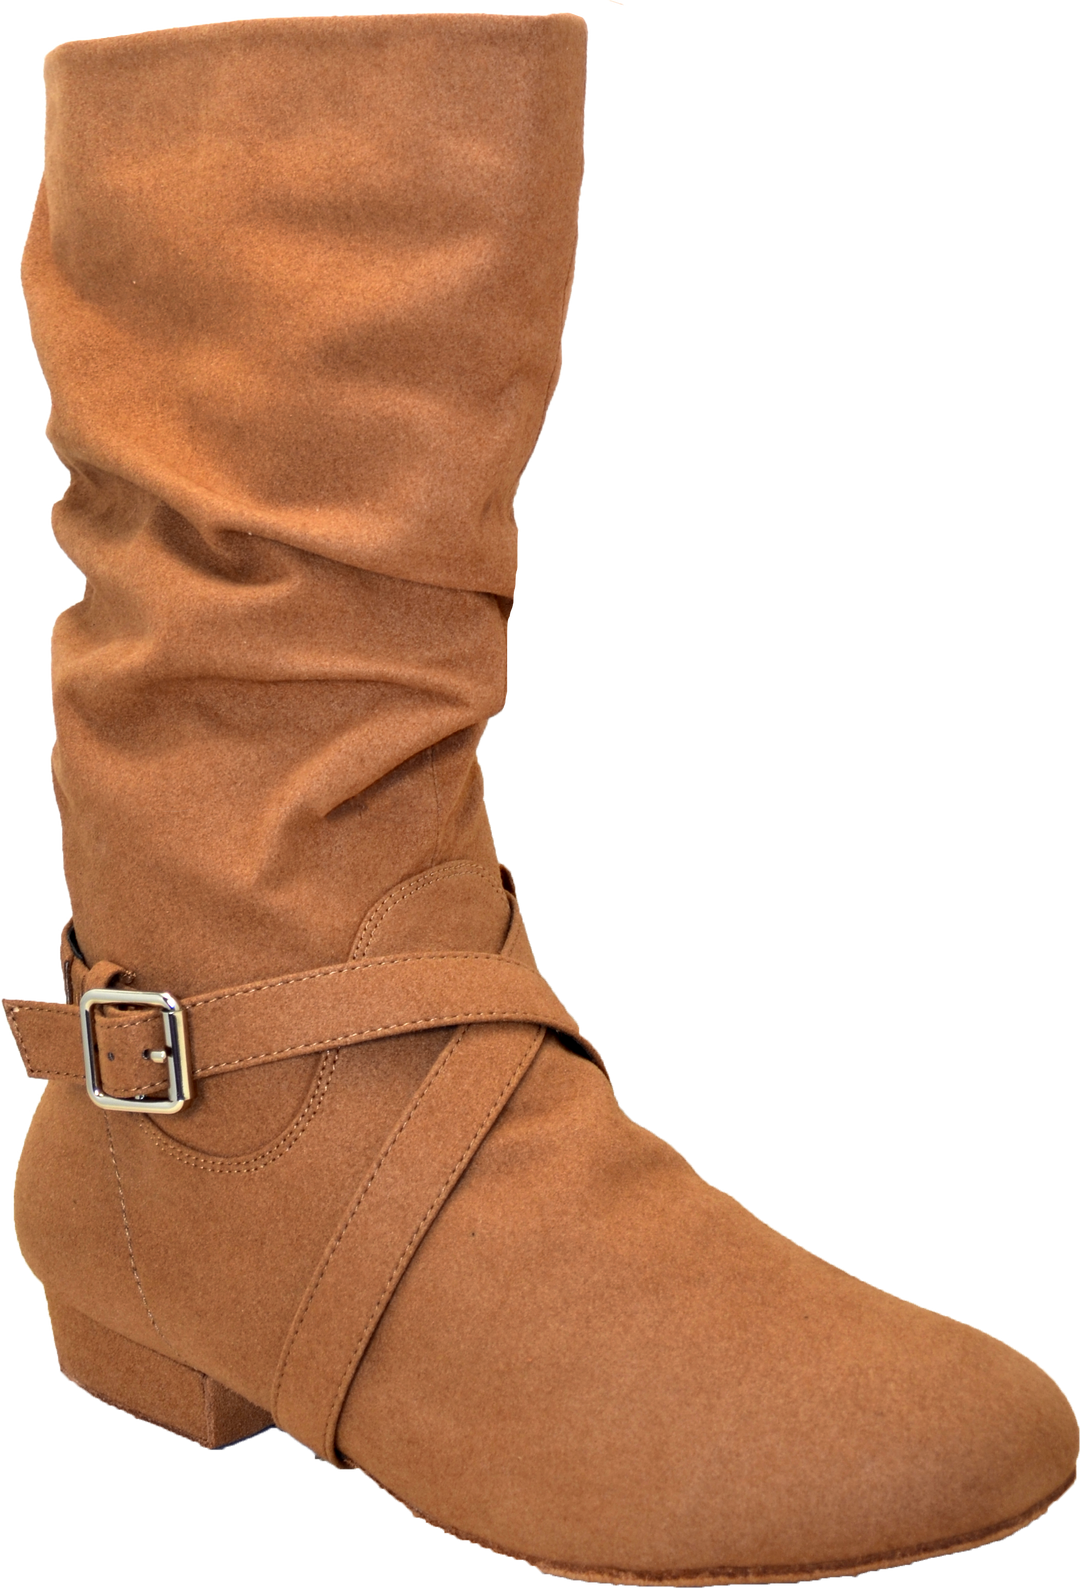 Ultimate Fashion Boot - Pixi - Light Brown (New)